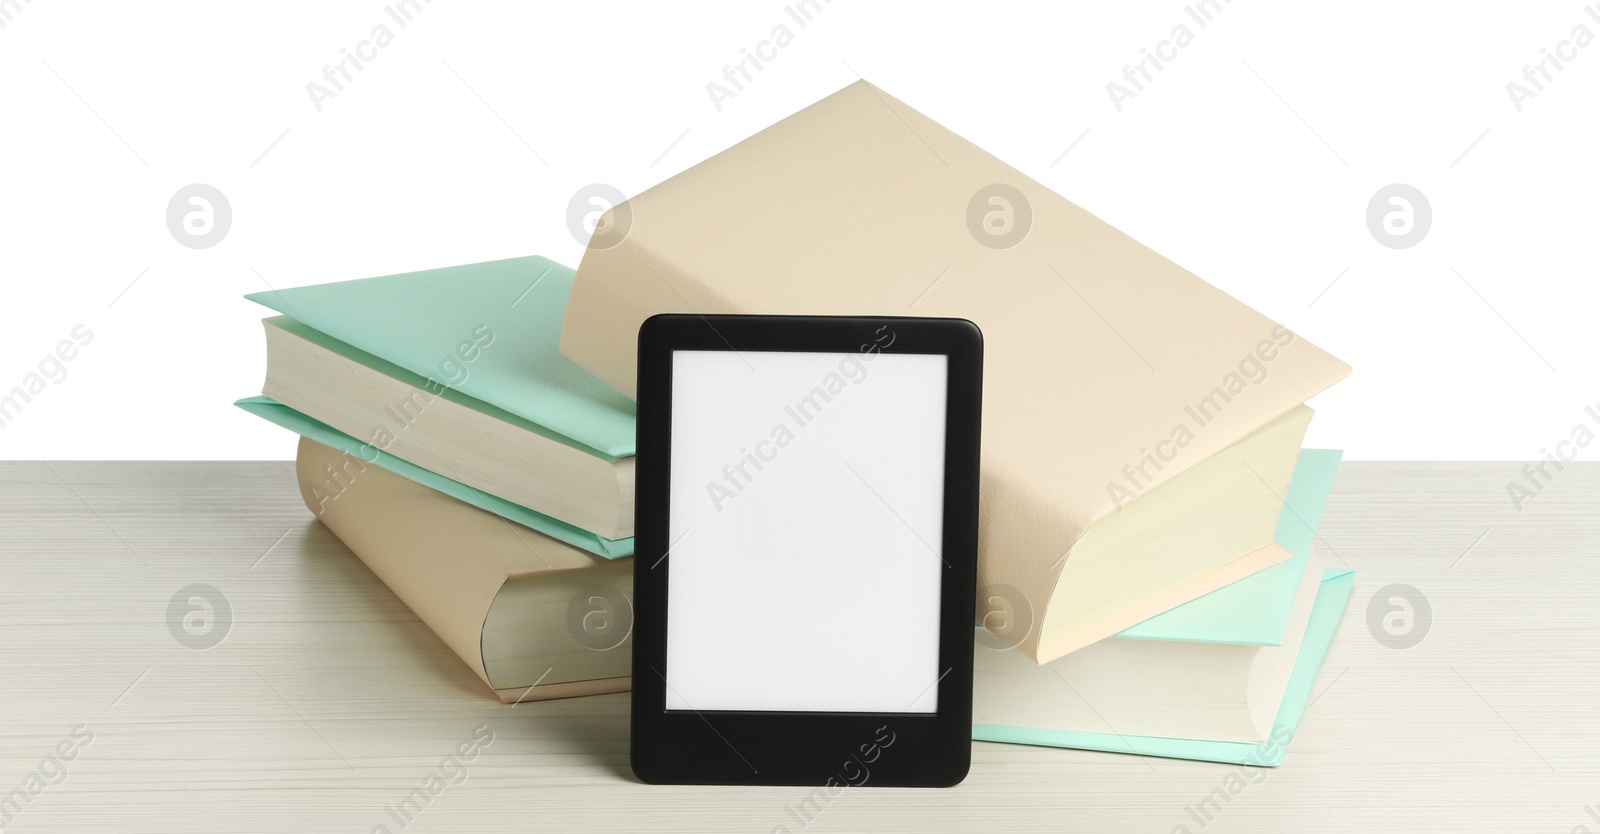 Photo of Hardcover books and modern e-book on wooden table against white background